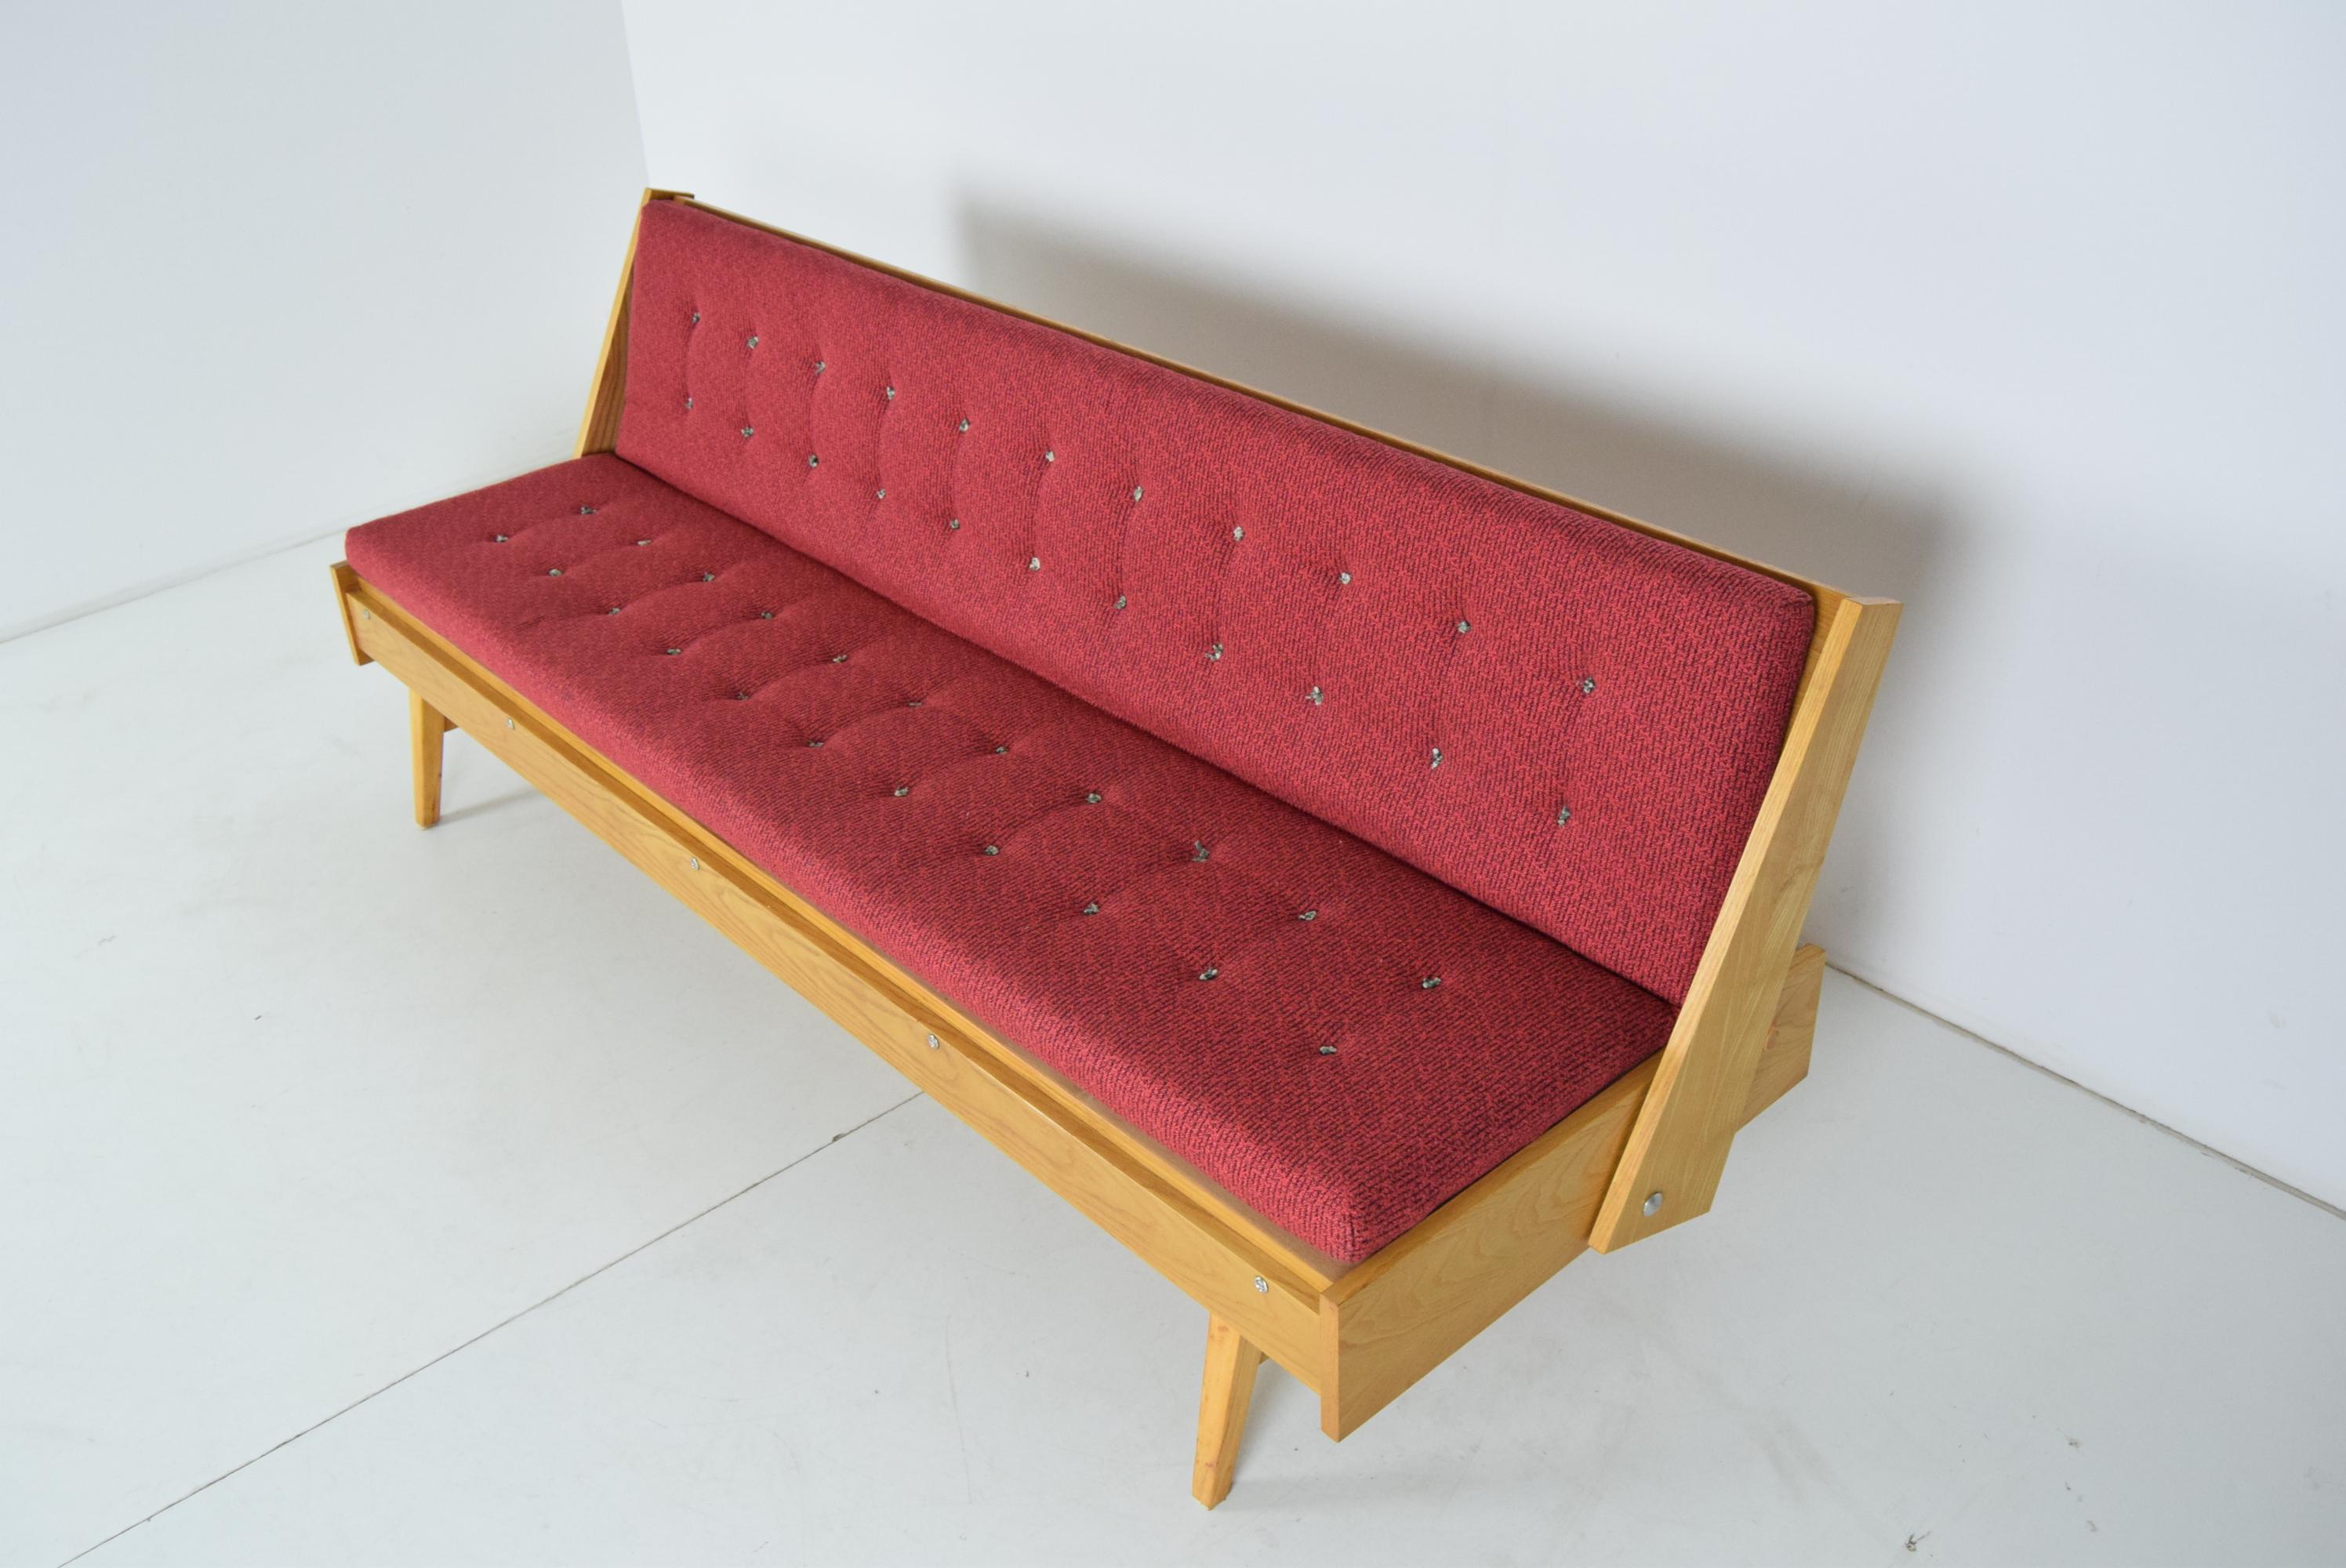 Mid-century folding sofa or daybed, 1960's.
Made in Czechoslovakia
Made of fabric, wood
Original condition.